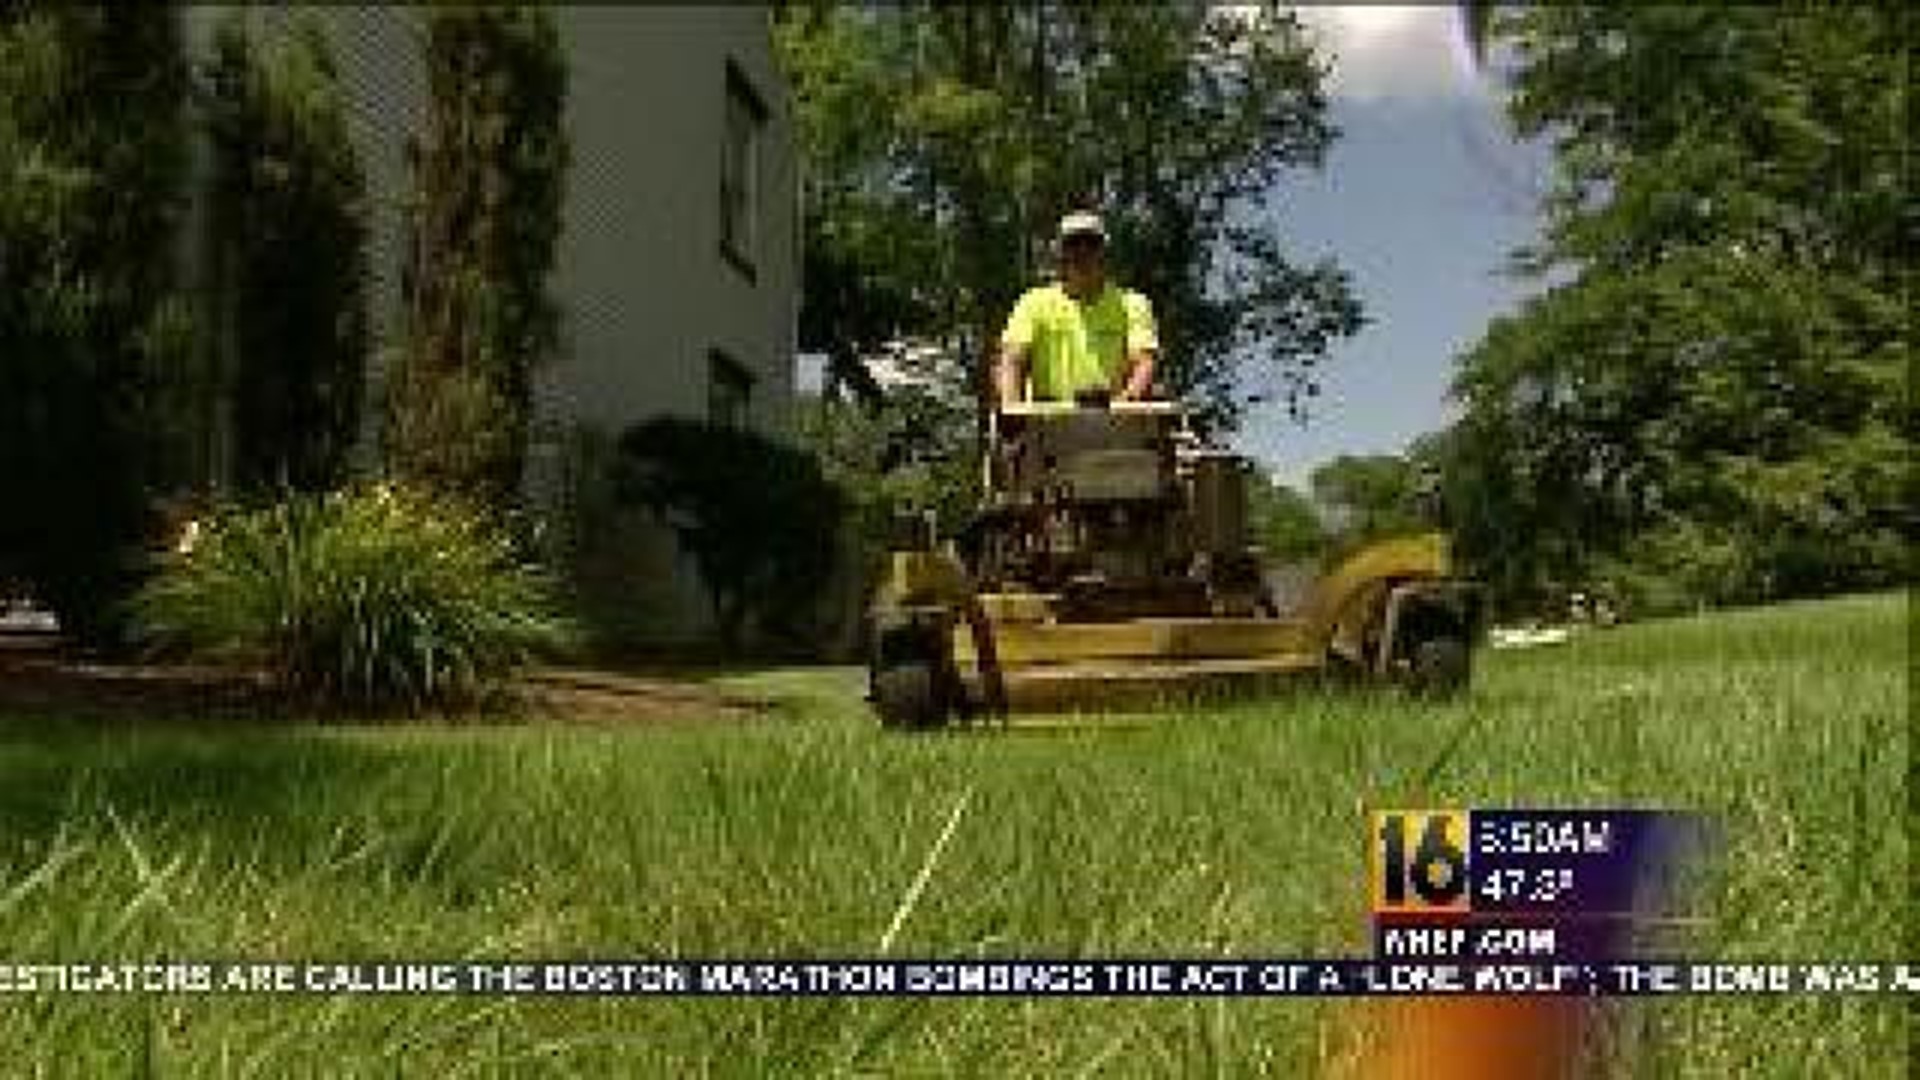 Spring Lawn Care: Mowers on the Move